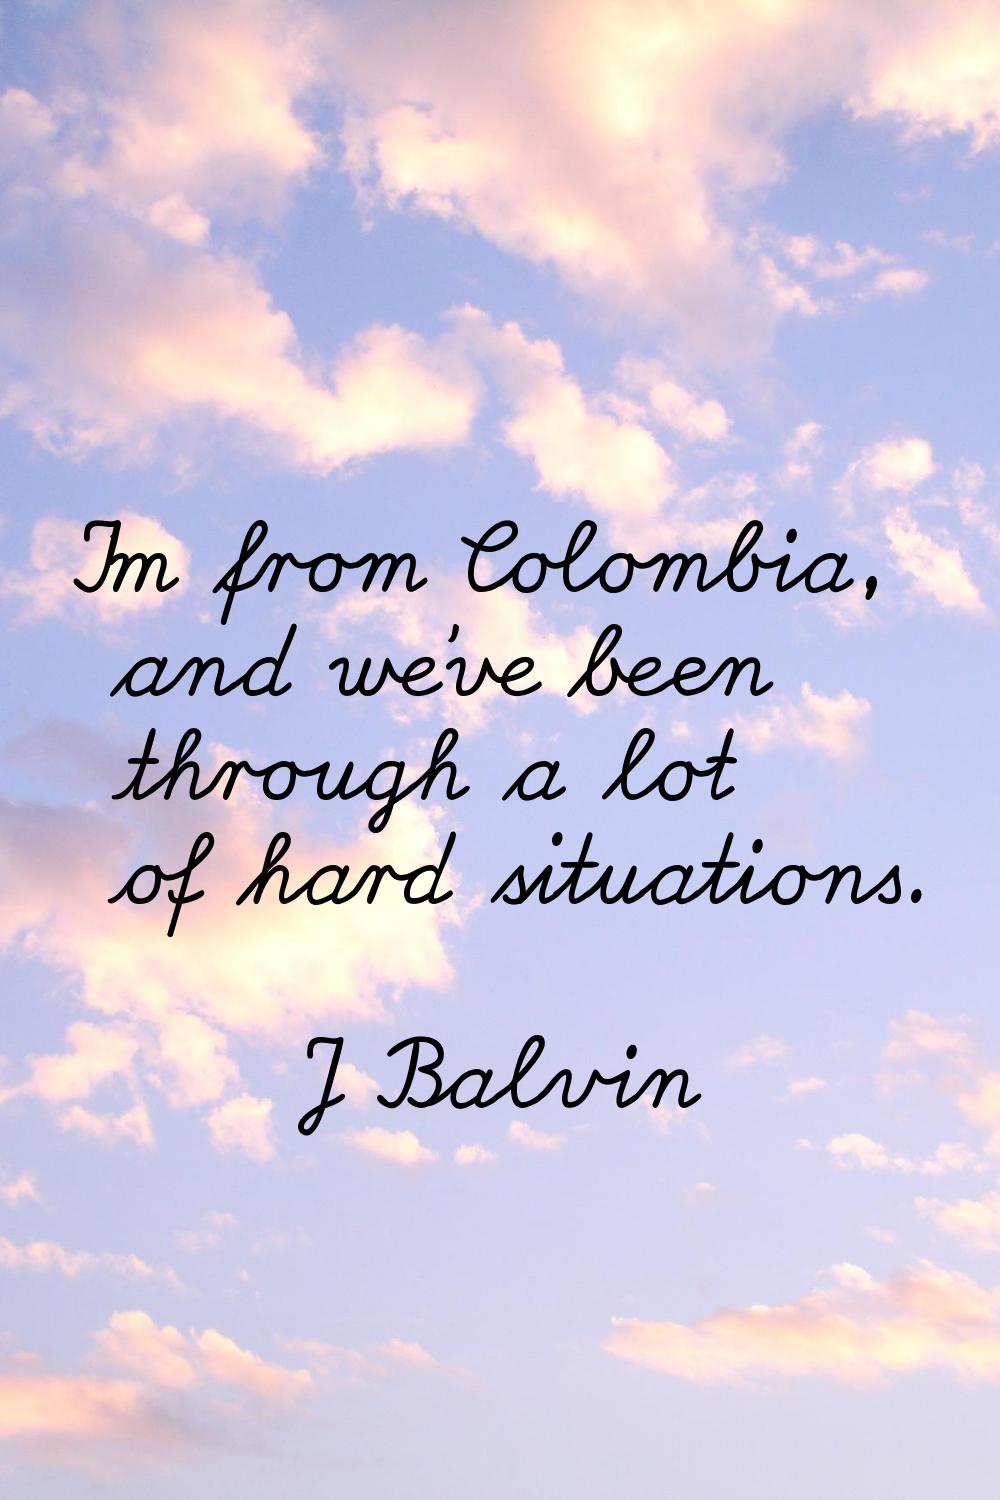 I'm from Colombia, and we've been through a lot of hard situations.